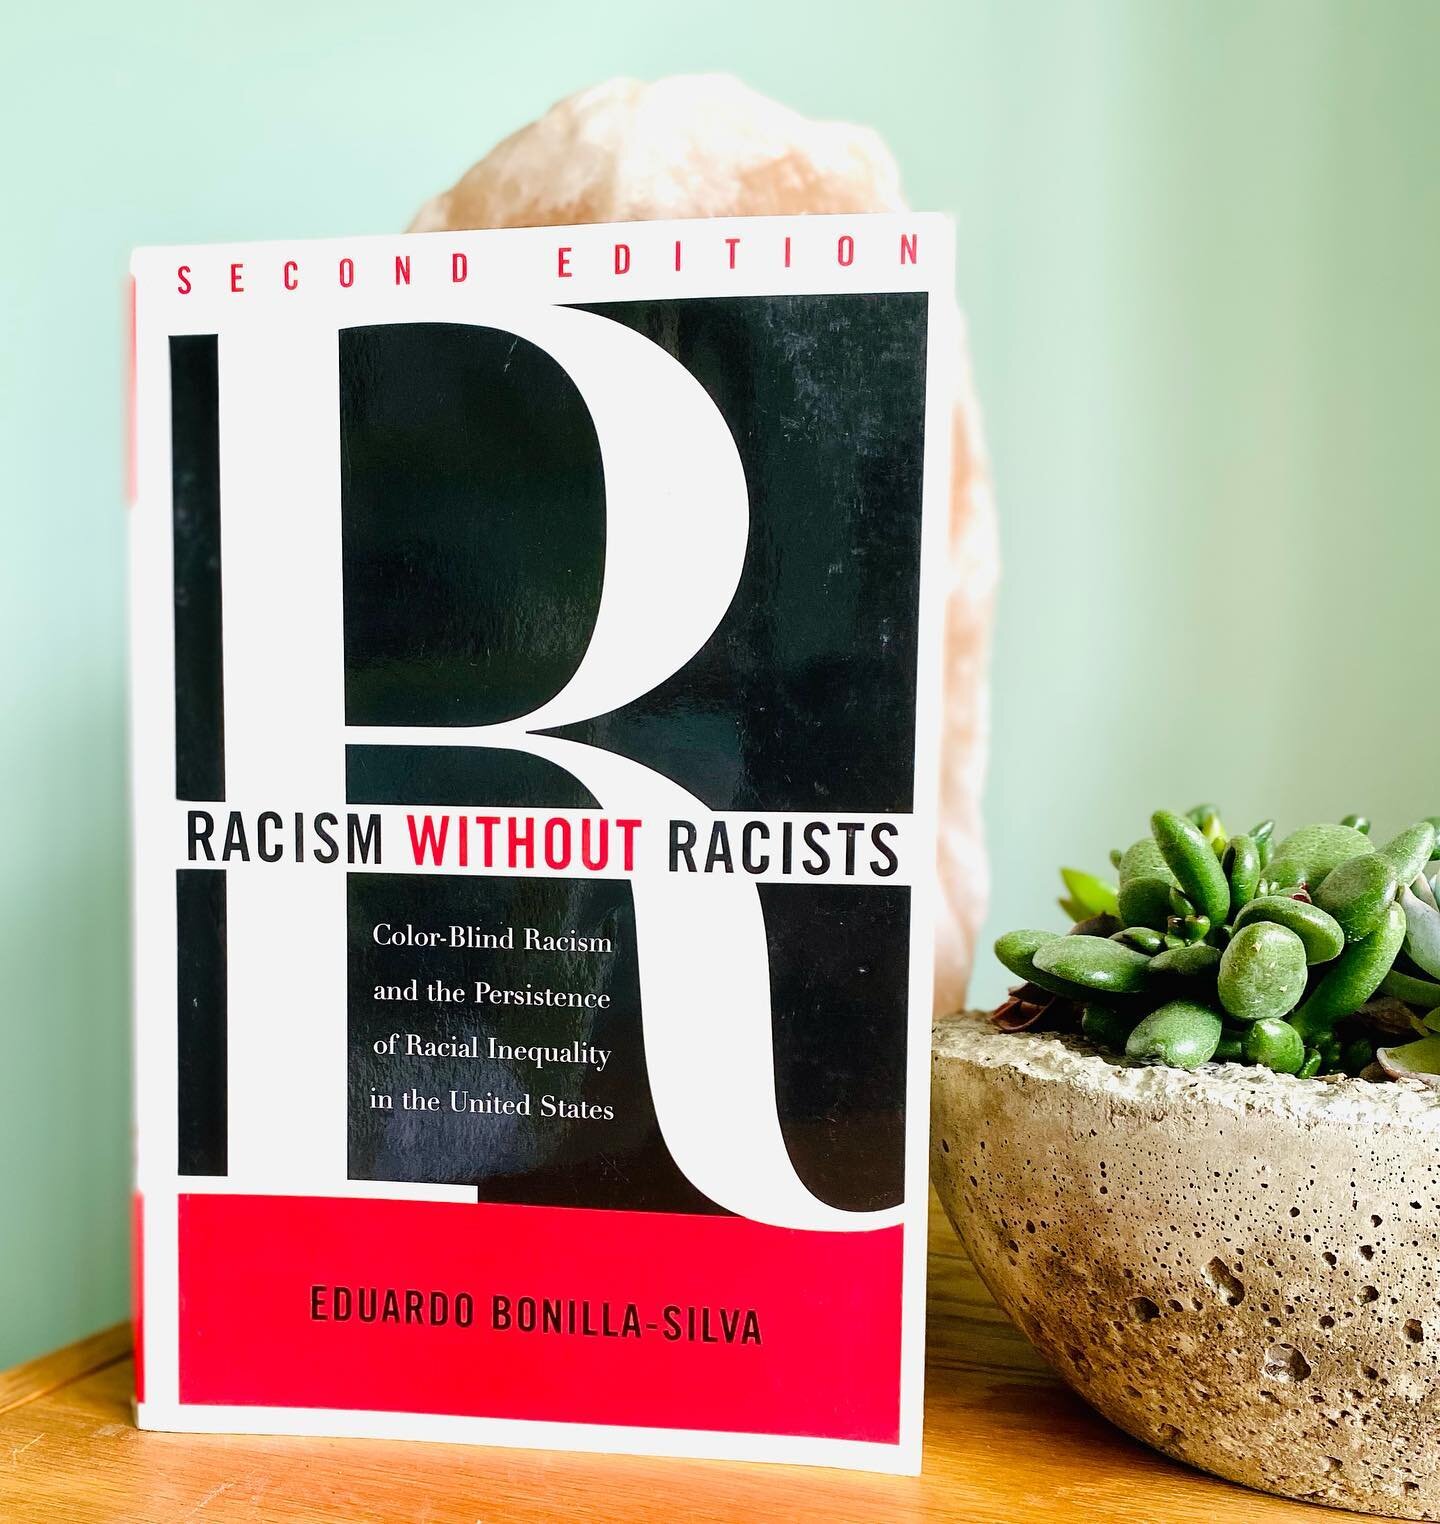 In our work with organizations, racism is rarely expressed openly&mdash;it&rsquo;s expressed in assumptions, in values, in euphemism, in what is NOT said. Understanding these forms of racism often relies on decoding what white people are communicatin